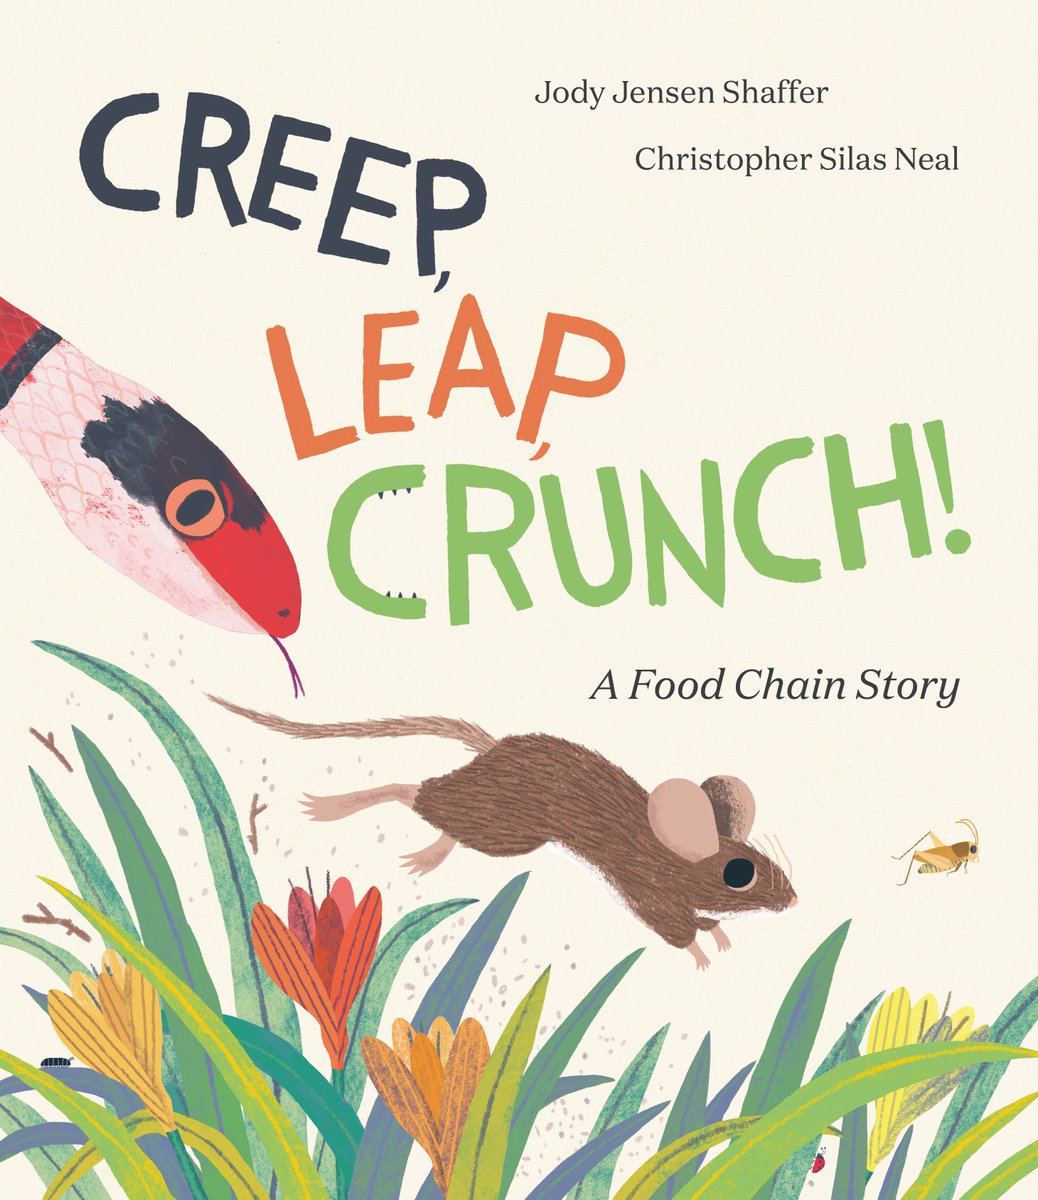 One week in, and I'm so grateful for your warm welcome of CREEP, LEAP, CRUNCH! Thank you, thank you teachers, librarians, bloggers, reviewers, friends, family, book lovers who have ordered & read. If you'd like a signed bookplate, just reach out via my website!